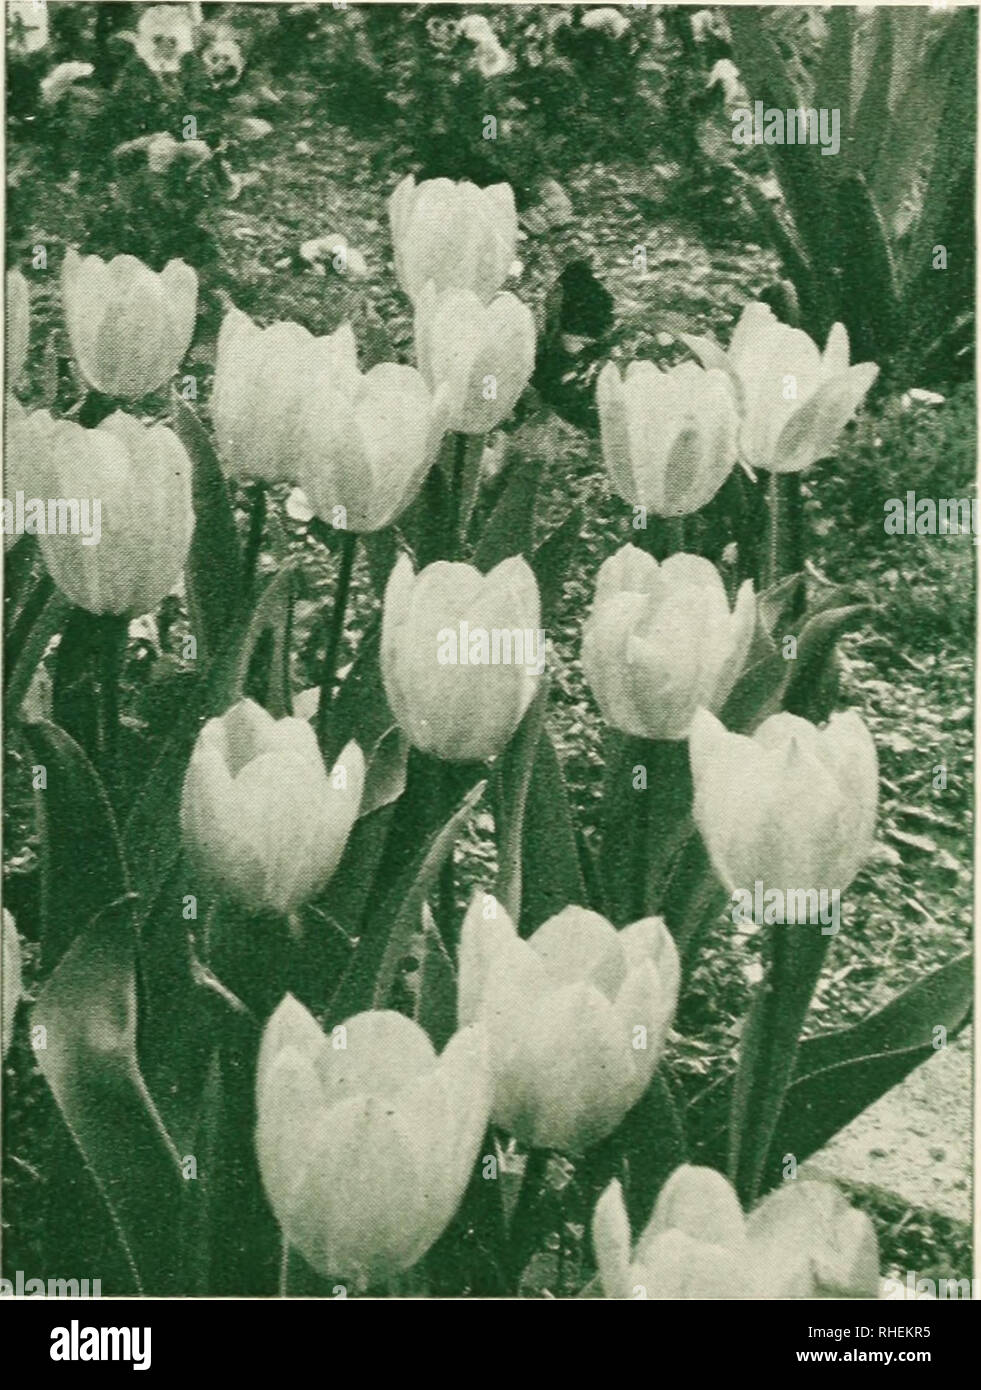 . Bolgiano's selected bulbs plants seeds for 1943 fall planting. Nurseries (Horticulture) Catalogs; Bulbs (Plants) Catalogs; Seeds Catalogs. TULIPS makeaparadeof color intheGarden Cottage Tulips — May-flowering Carrara. Purest white; ivory stamens. Dido. Orange-red changing to orange-yellow. 30 in. Inglescombe Pink. Delicate rose-pink, tinted salmon. 2.1 in. Inglescombe Yellow. Perfect flowers of full, rich yellow. 11 in. Mrs. Moon. Deep yellow reflexed pointed petals. 25 in. All Cottage Tulips, except where noted, 12c. each; $1.10 for 10; $8.50 per 100 Picotee Maiden's Blush). White margined  Stock Photo